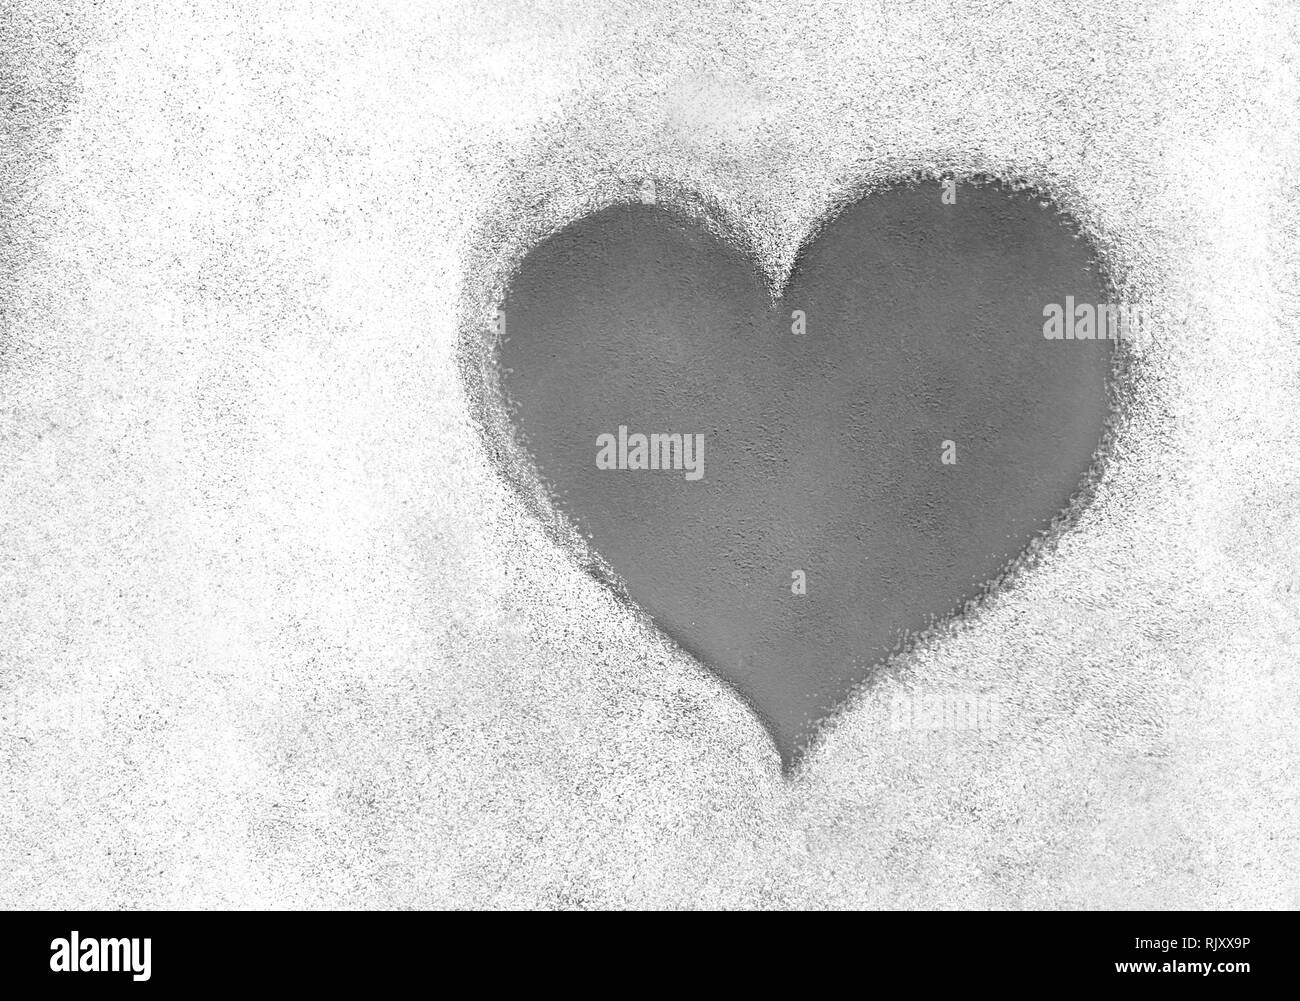 Grunge texture with grey heart symbol. It can be used as a Valentine's theme, poster, wallpaper, design t-shirts and more. Stock Photo